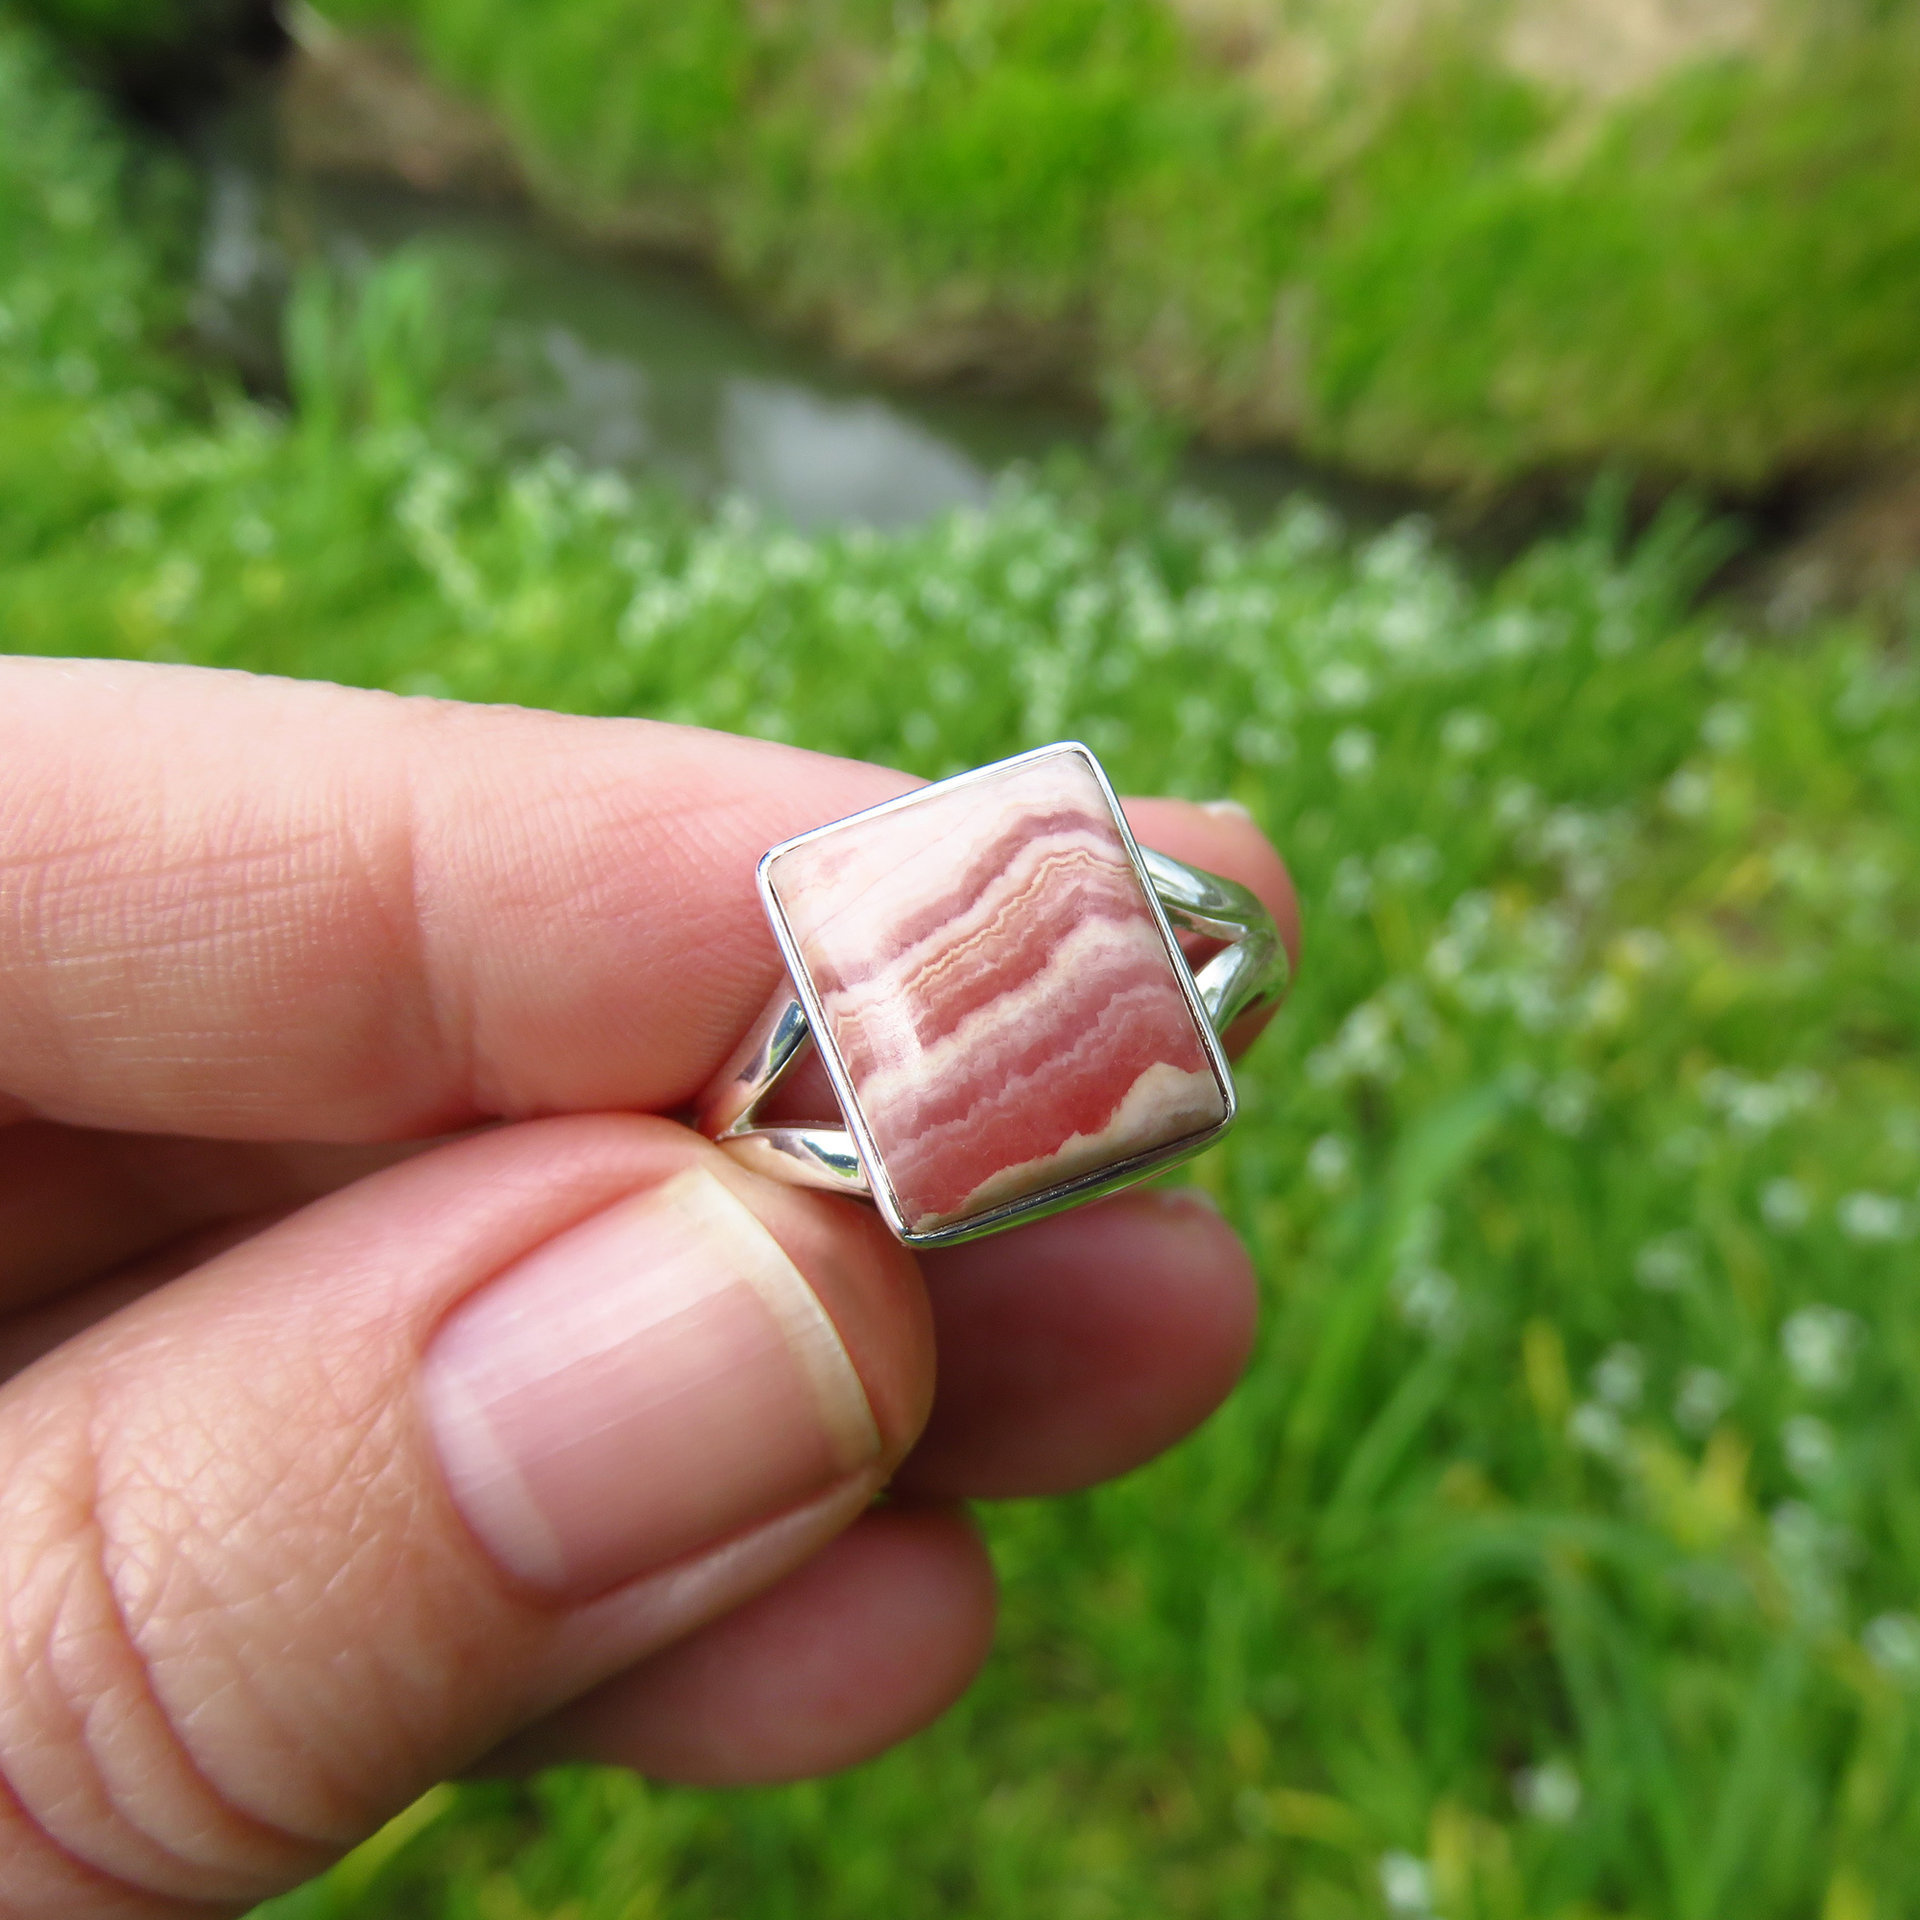 Rhodochrosite Ring Size 9, Rectangle Cabochon, 925 Sterling Silver 